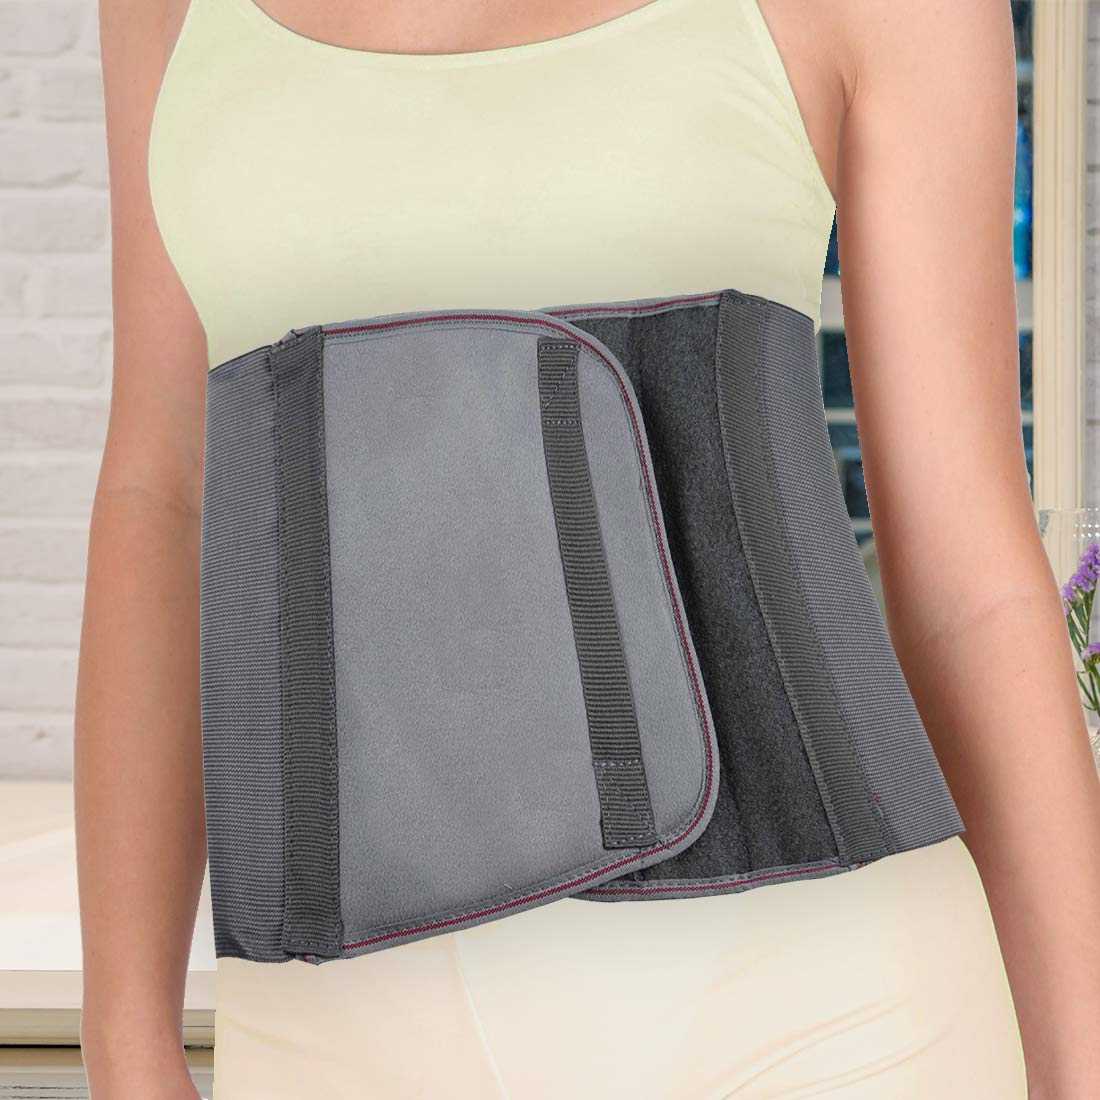 Post Pregnancy Support & Recovery Belt for Compression Support - L